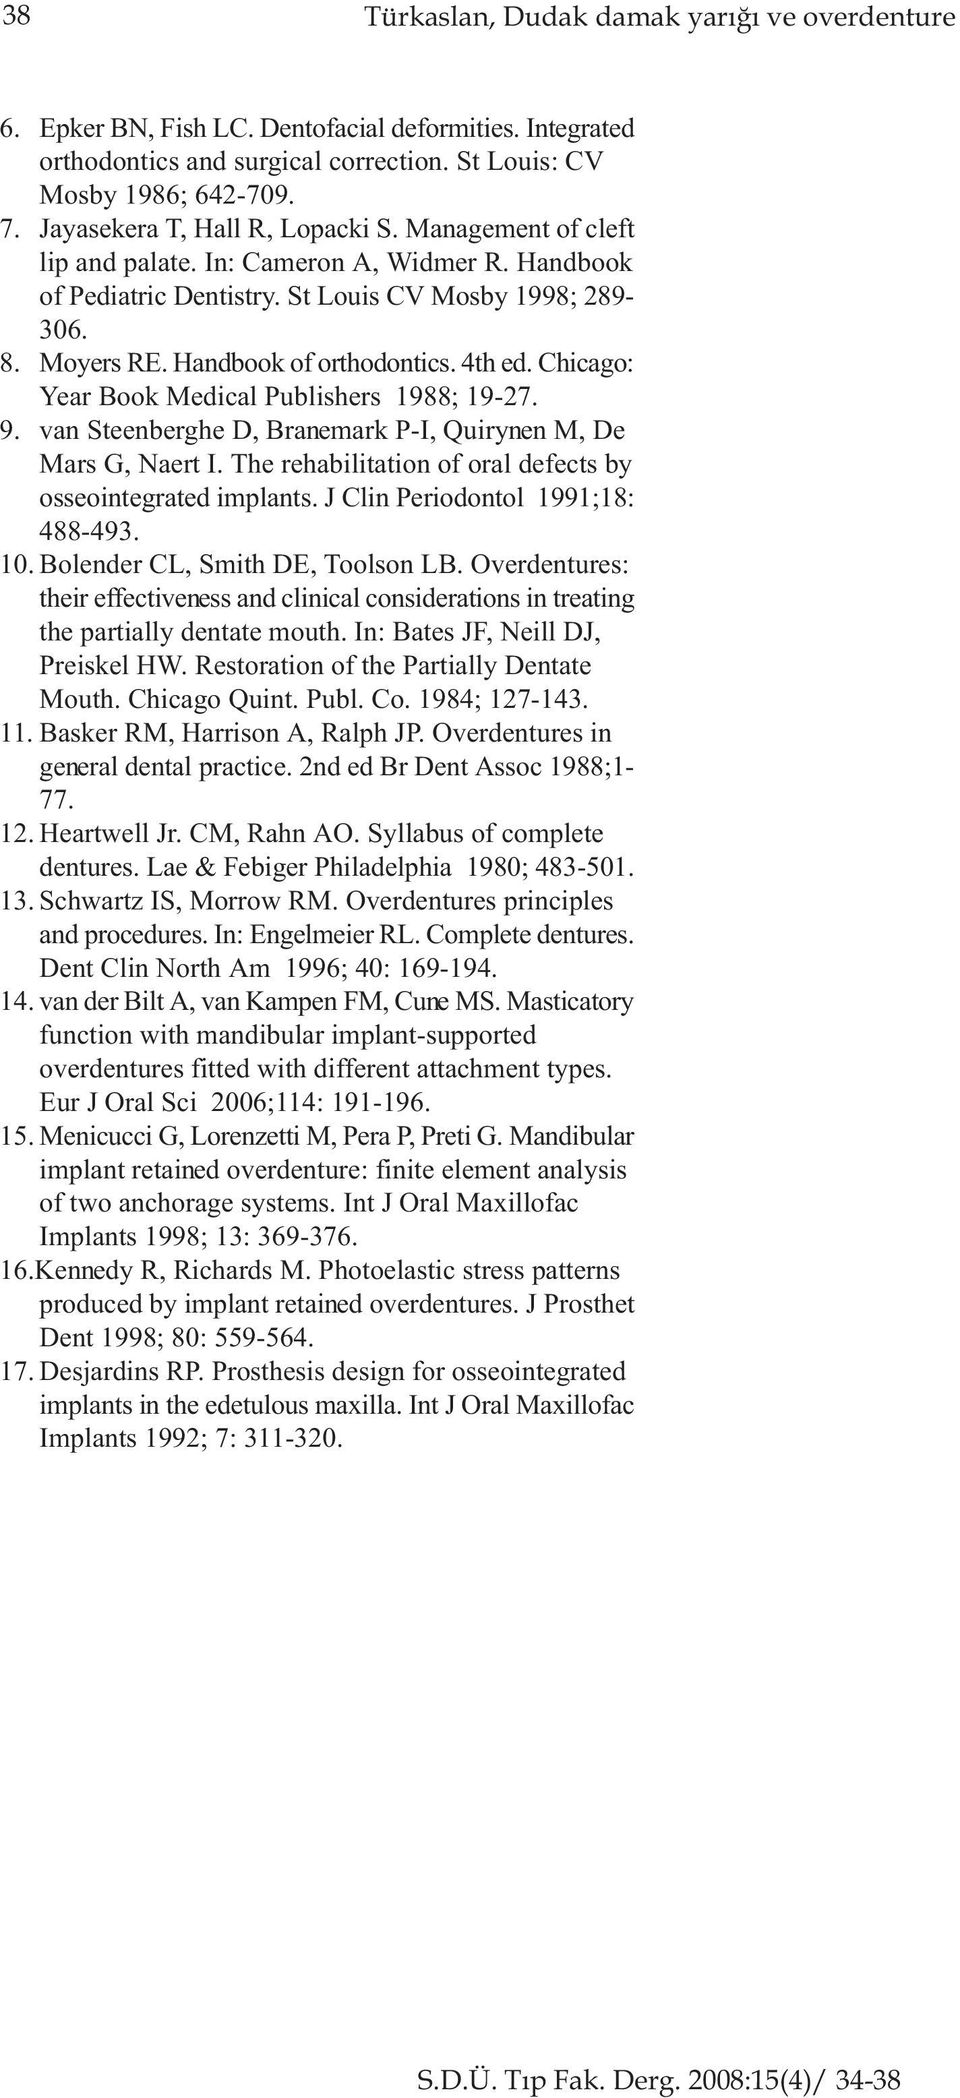 4th ed. Chicago: Year Book Medical Publishers 1988; 19-27. 9. van Steenberghe D, Branemark P-I, Quirynen M, De Mars G, Naert I. The rehabilitation of oral defects by osseointegrated implants.